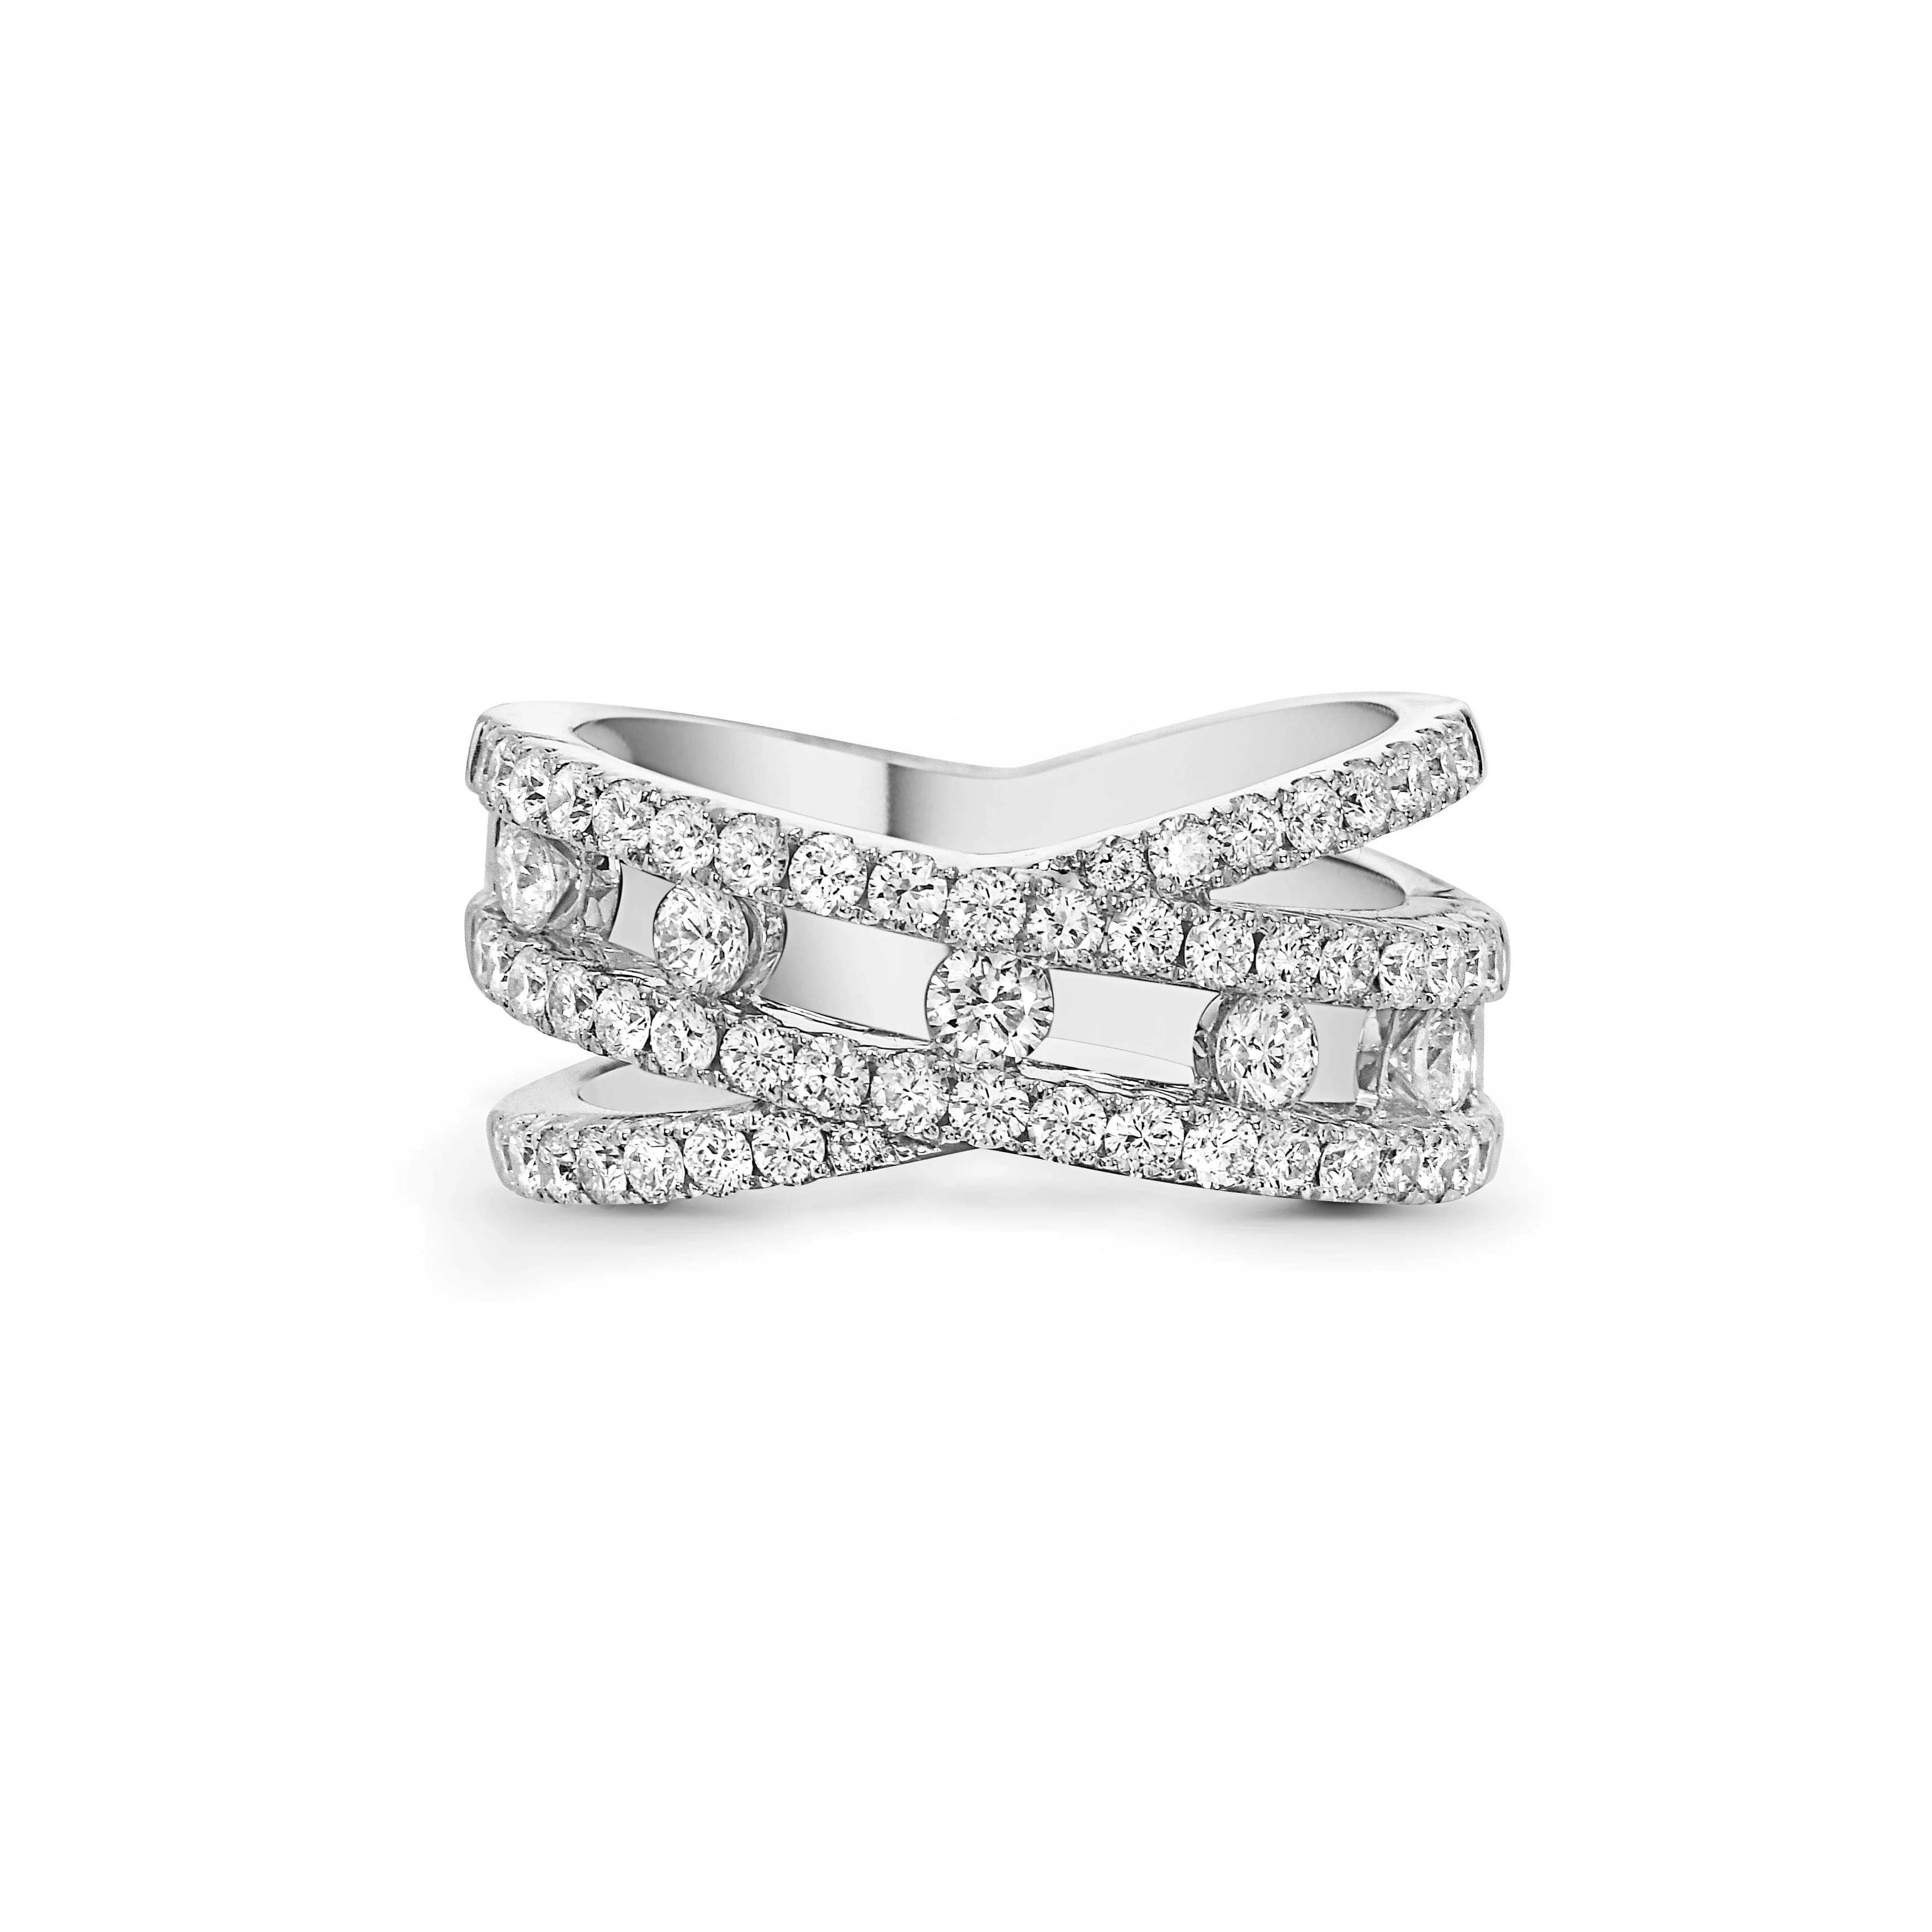 Charles Krypell Air Crossover Ring in White Gold